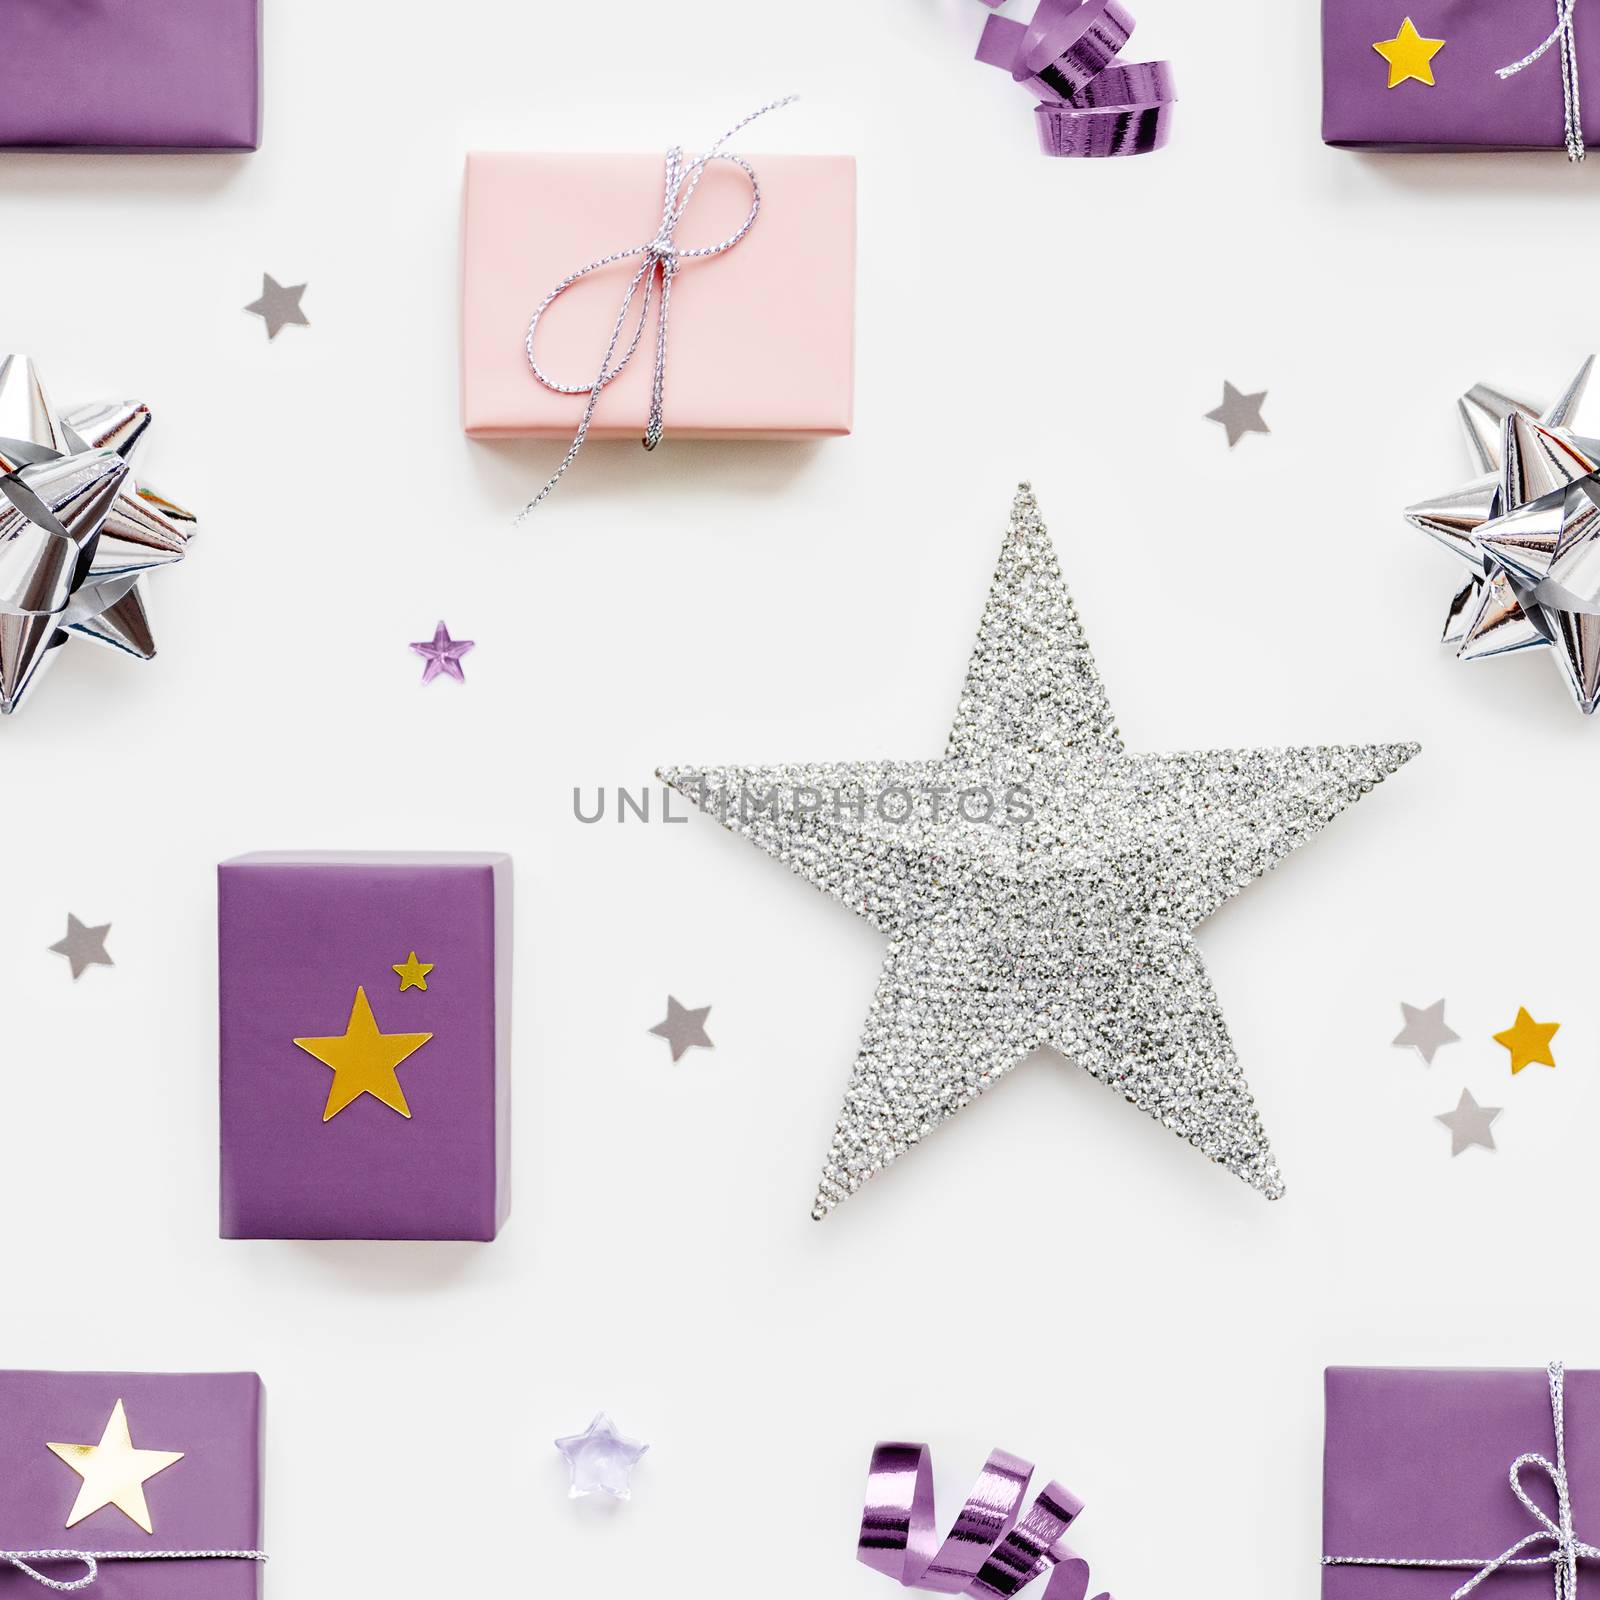 Photo seamless pattern with holiday presents. Gifts wrapped in pale pink and violet paper with silver ribbons and bow. Stars confetti. Top view, flat lay.